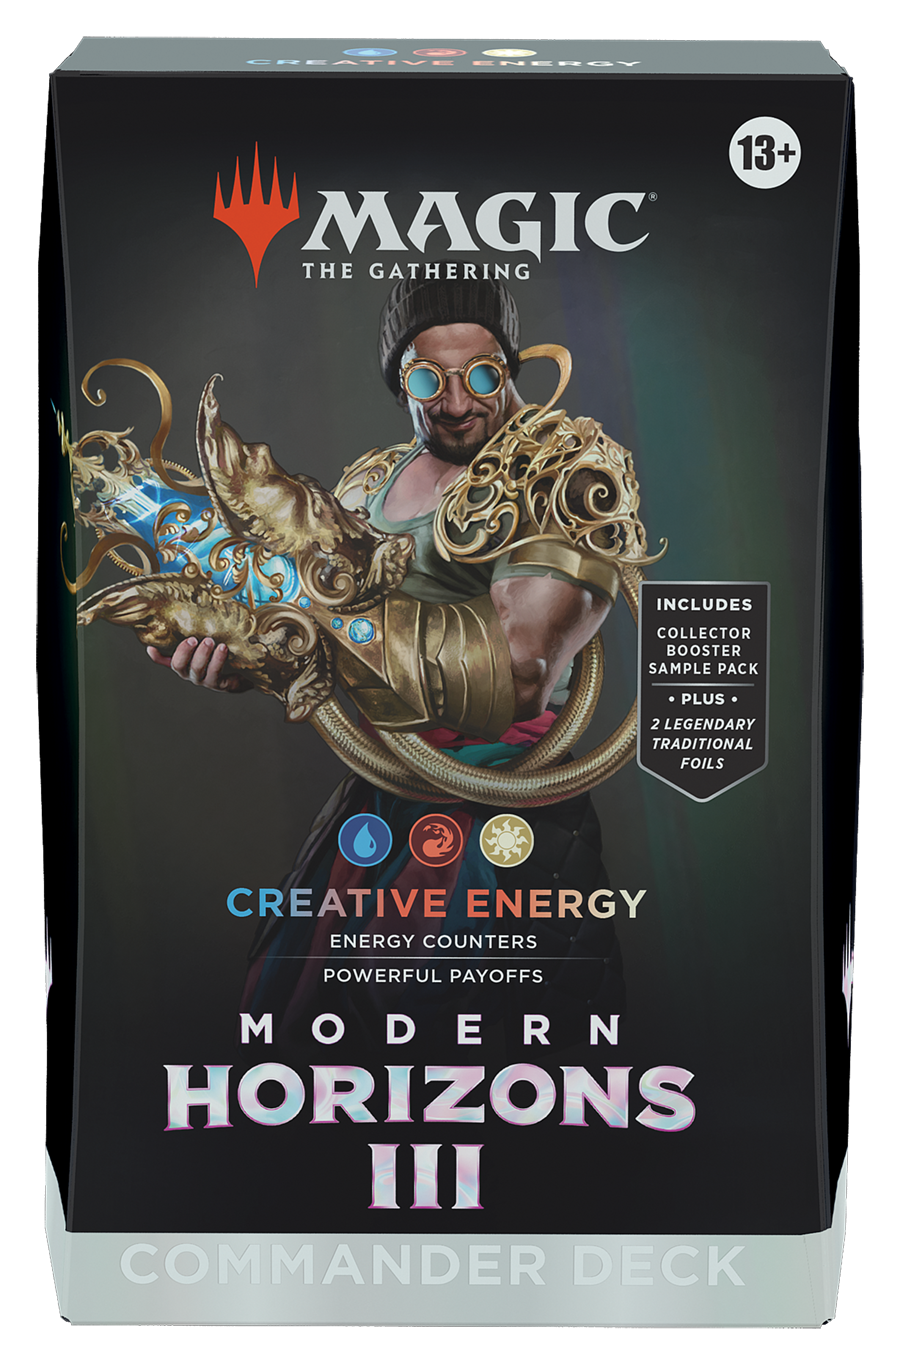 Magic: The Gathering Modern Horizons 3 Commander Deck - Creative Energy - PREORDER - Expected 6/12